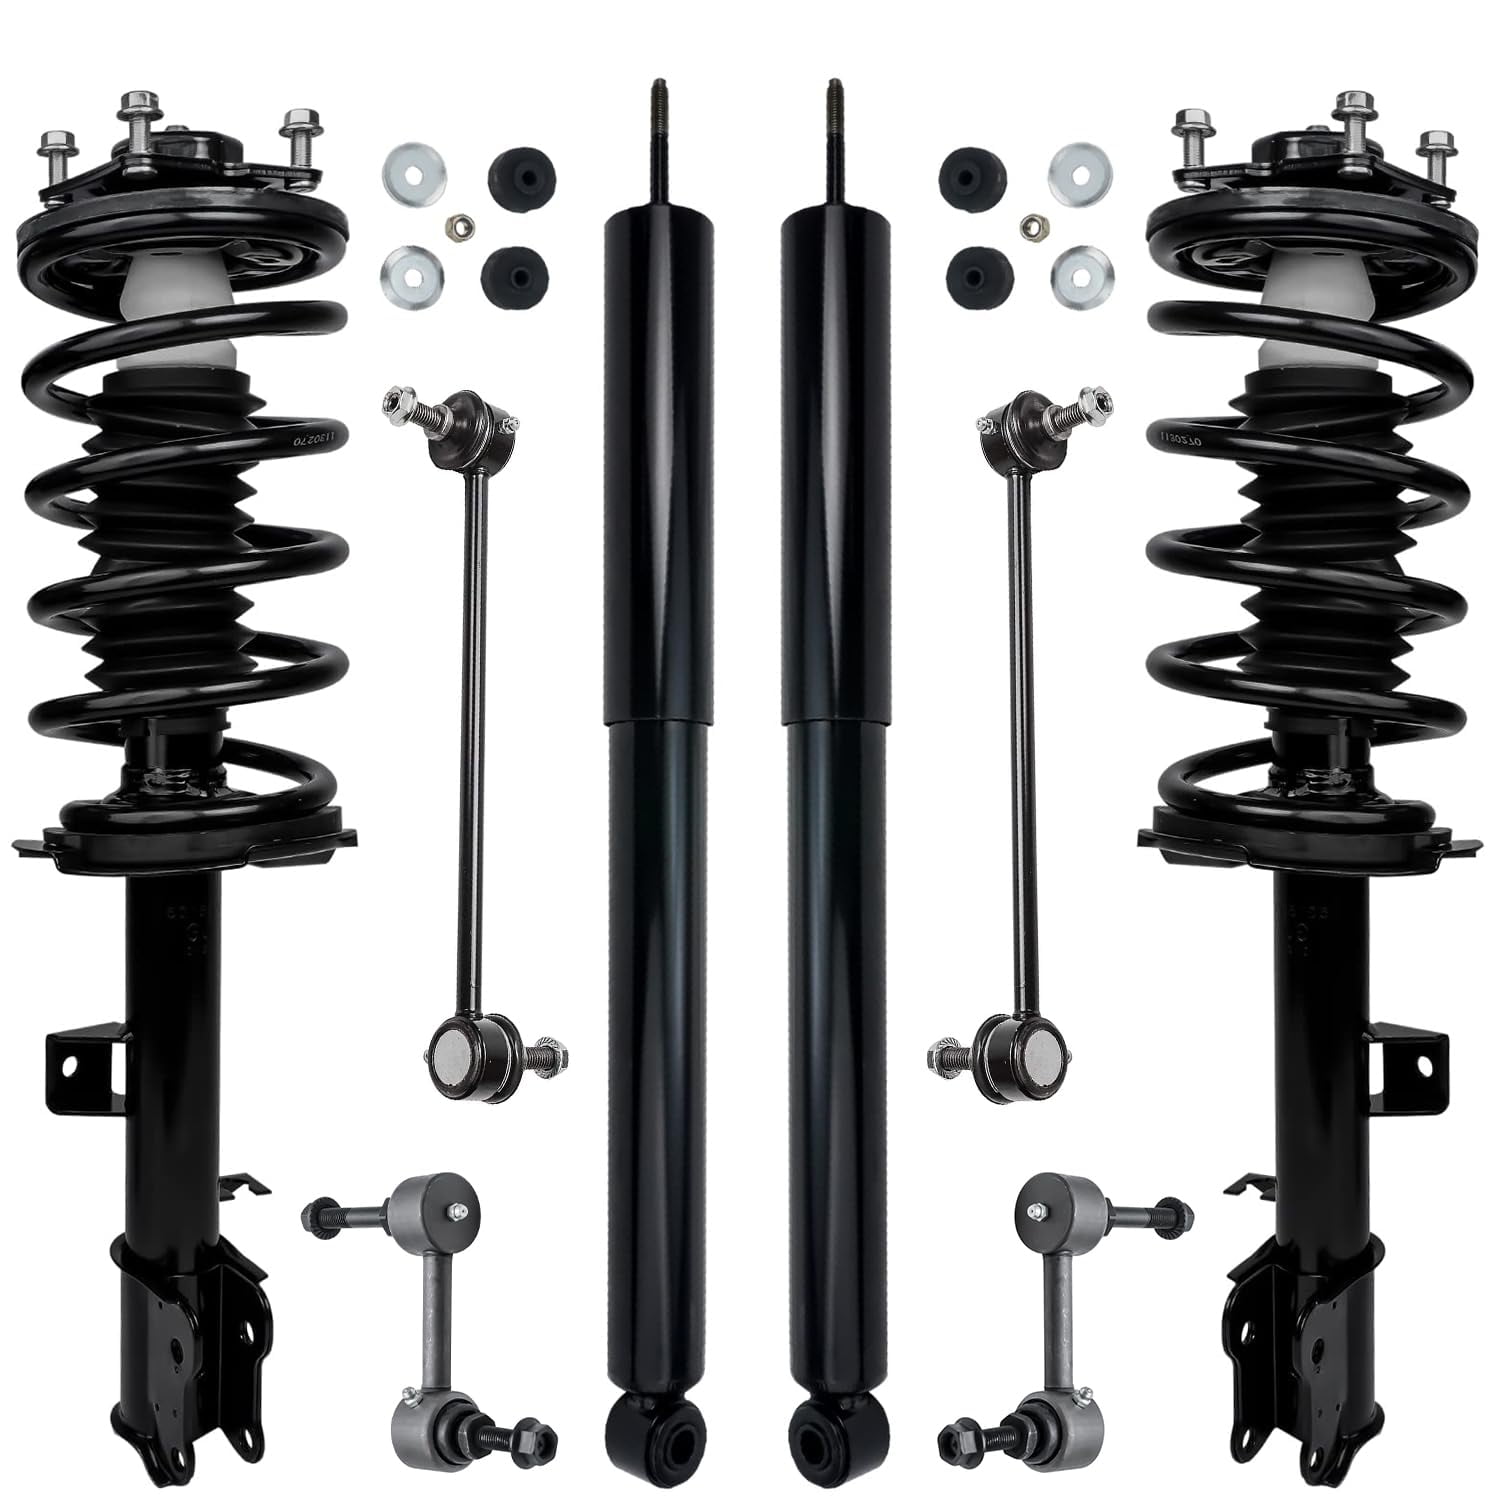 Detroit Axle - 8pc Struts Shock Absorbers Kit for 09-11 Ford